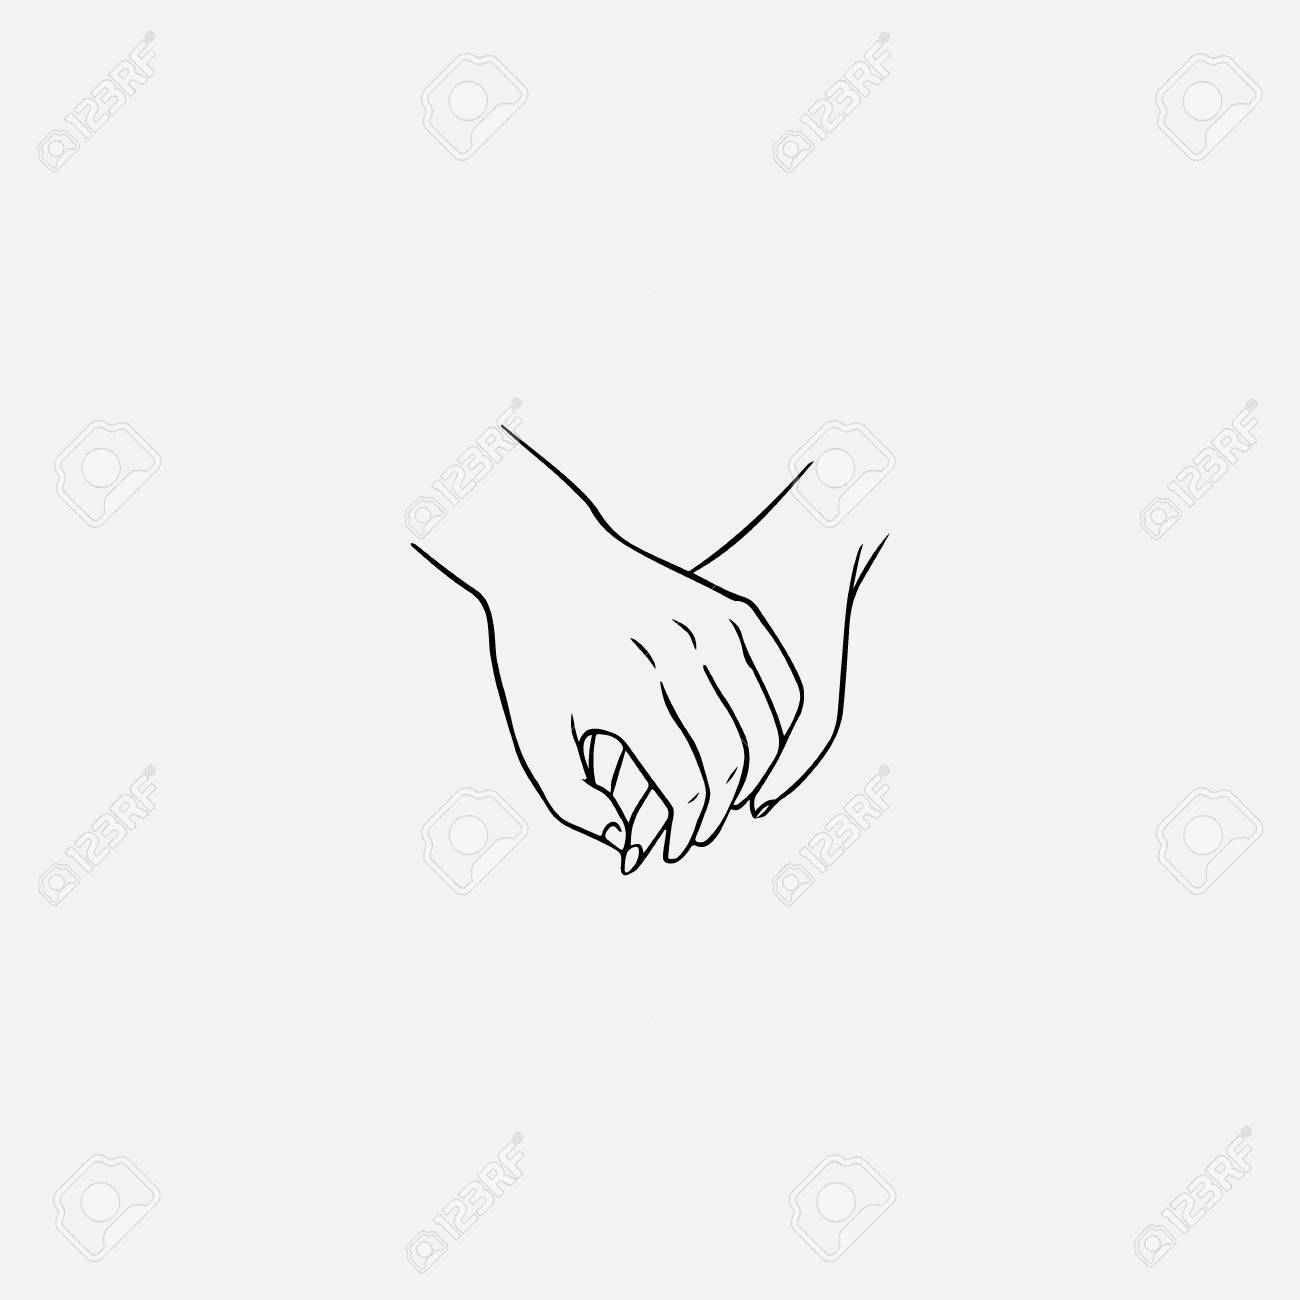 Drawing Of One Hand Clasping Other Isolated On White Background pertaining to Drawing Relationship